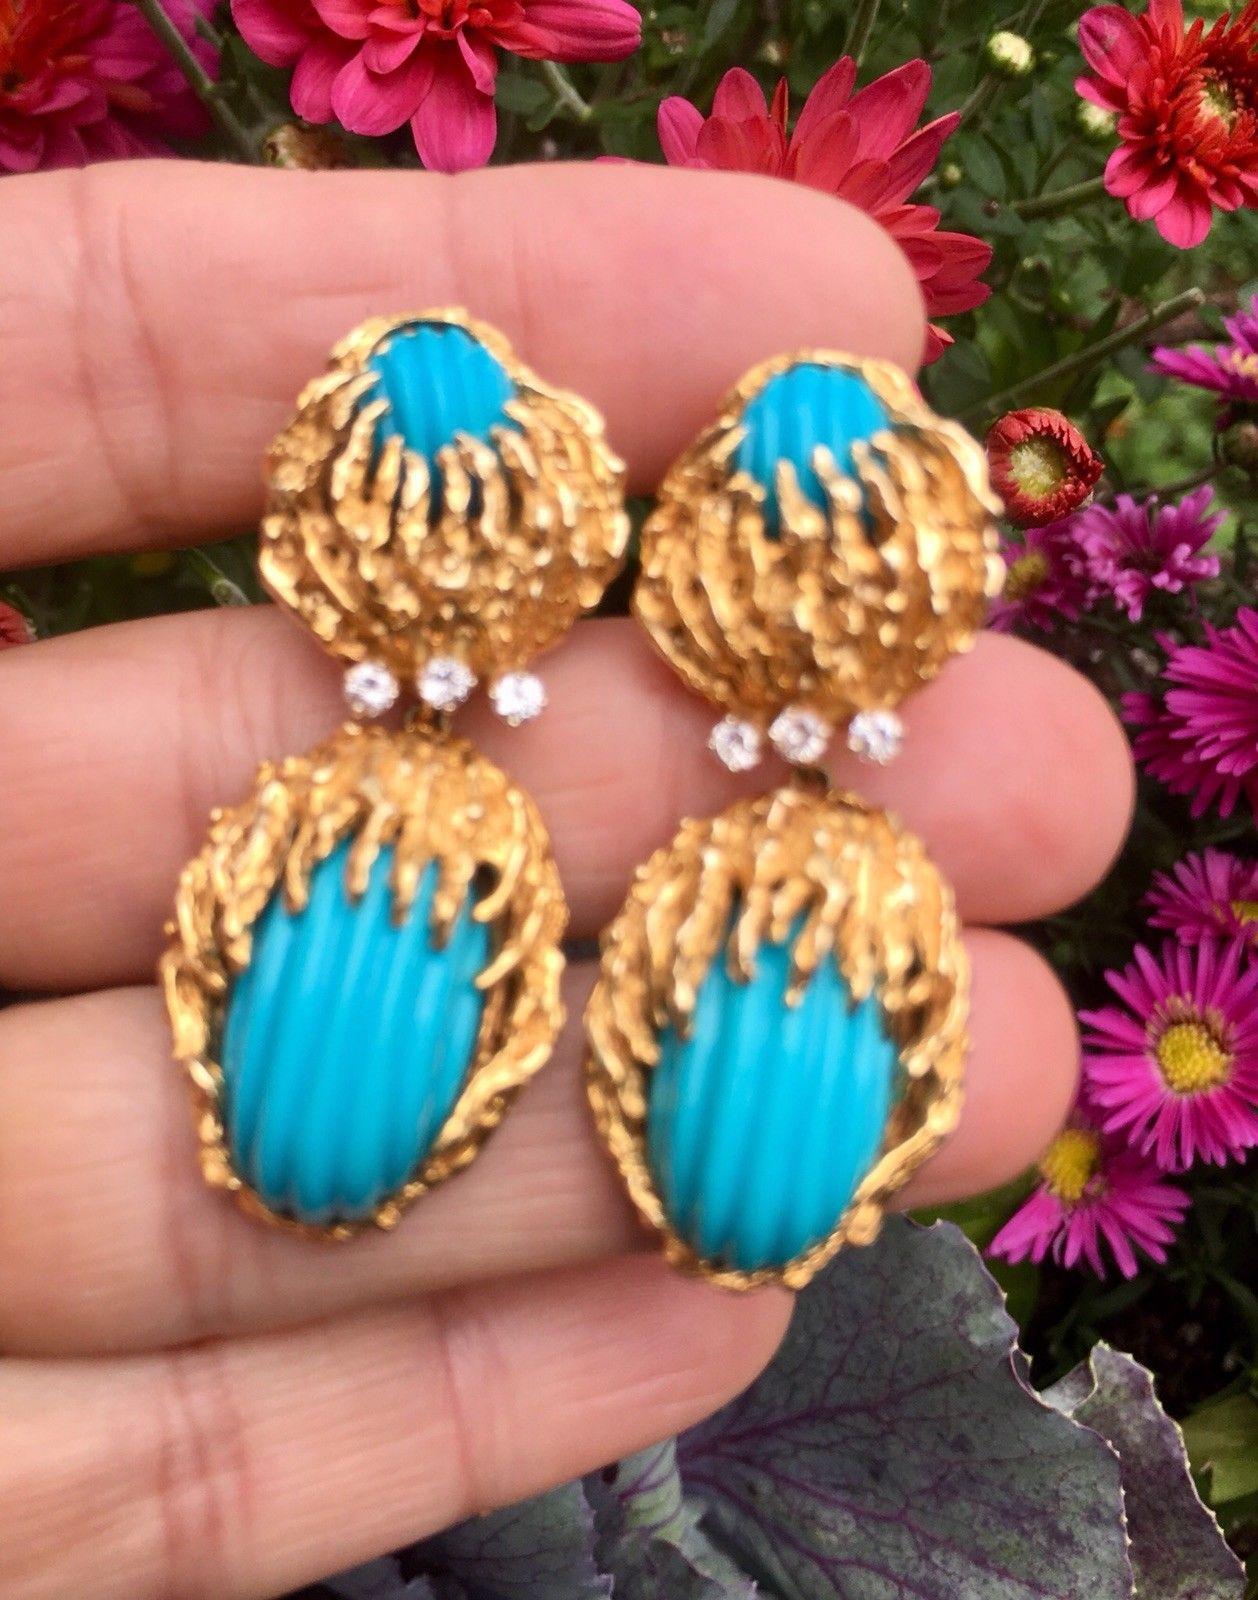 These gorgeous impressive earrings are styled in 14k bright rich yellow naturalistic free-form richly colored gold, set with two carved turquoise cabochons each, with a deep turquoise blue luster.   

The earrings are also set with 6 brilliant round